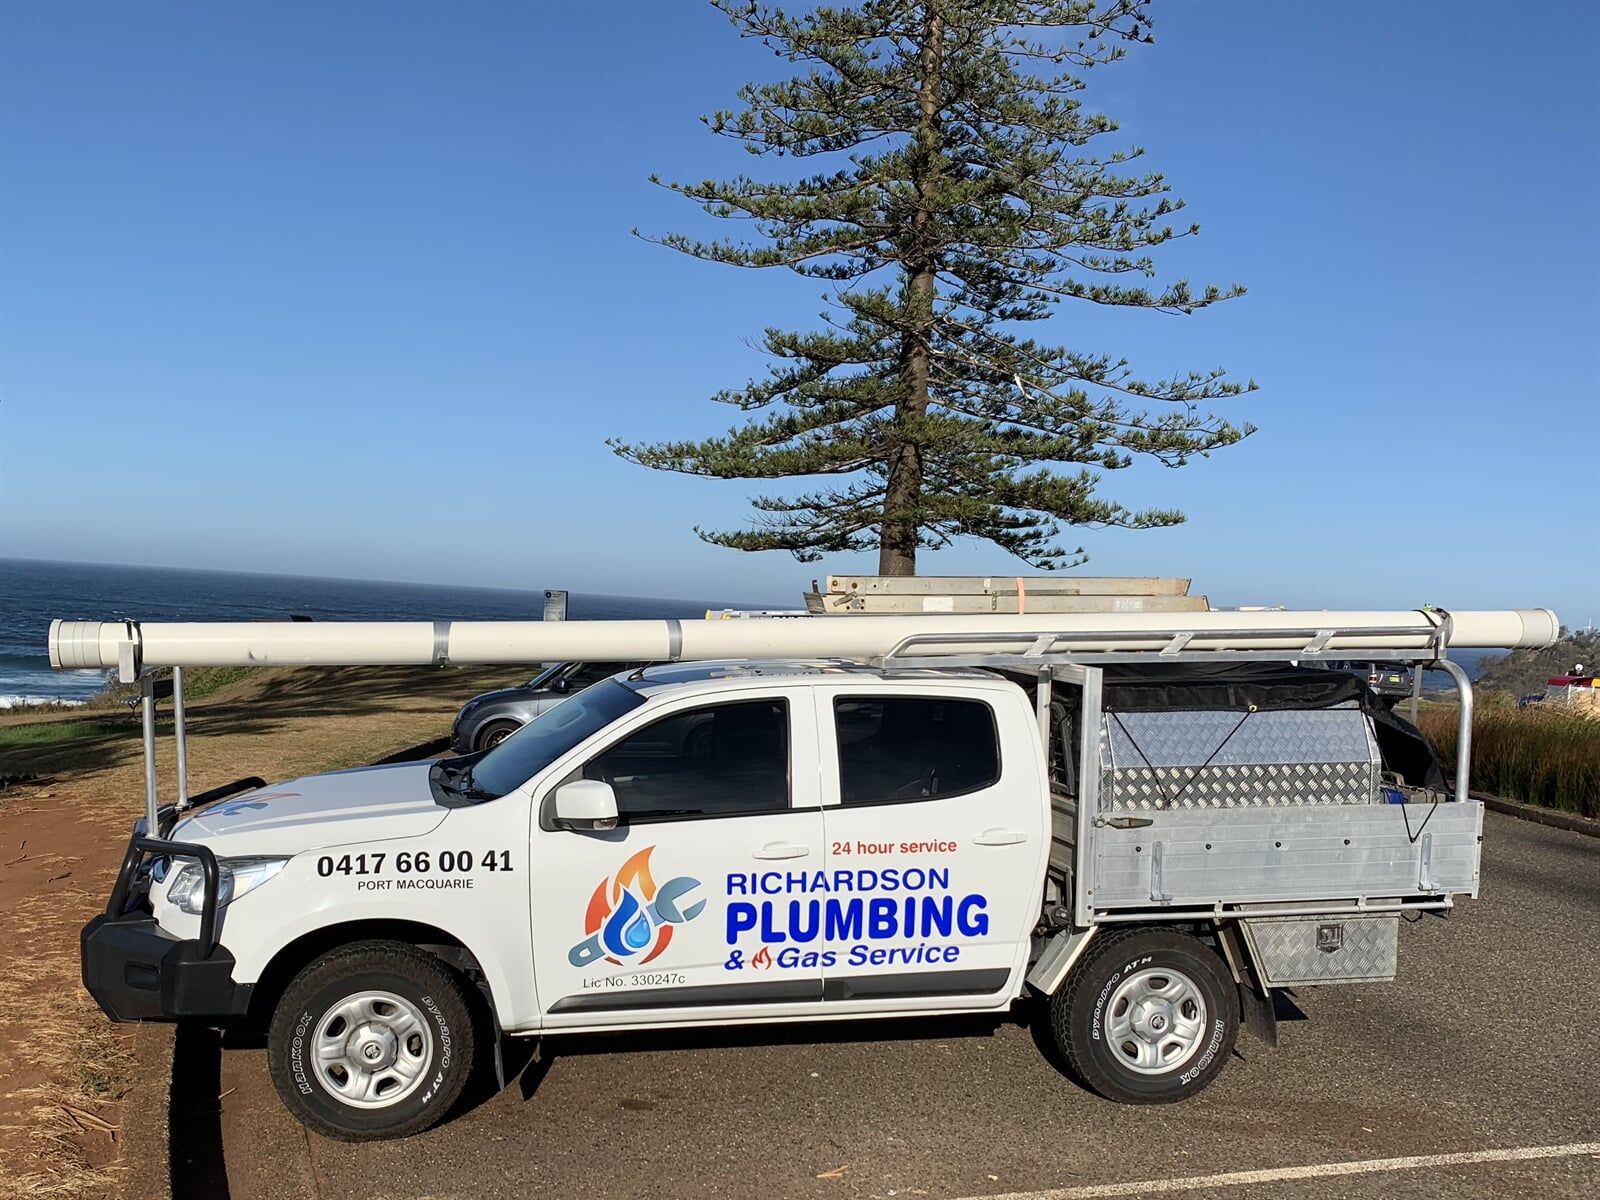 Richardson Plumbing Services — Plumbing Services in Port Macquarie, NSW